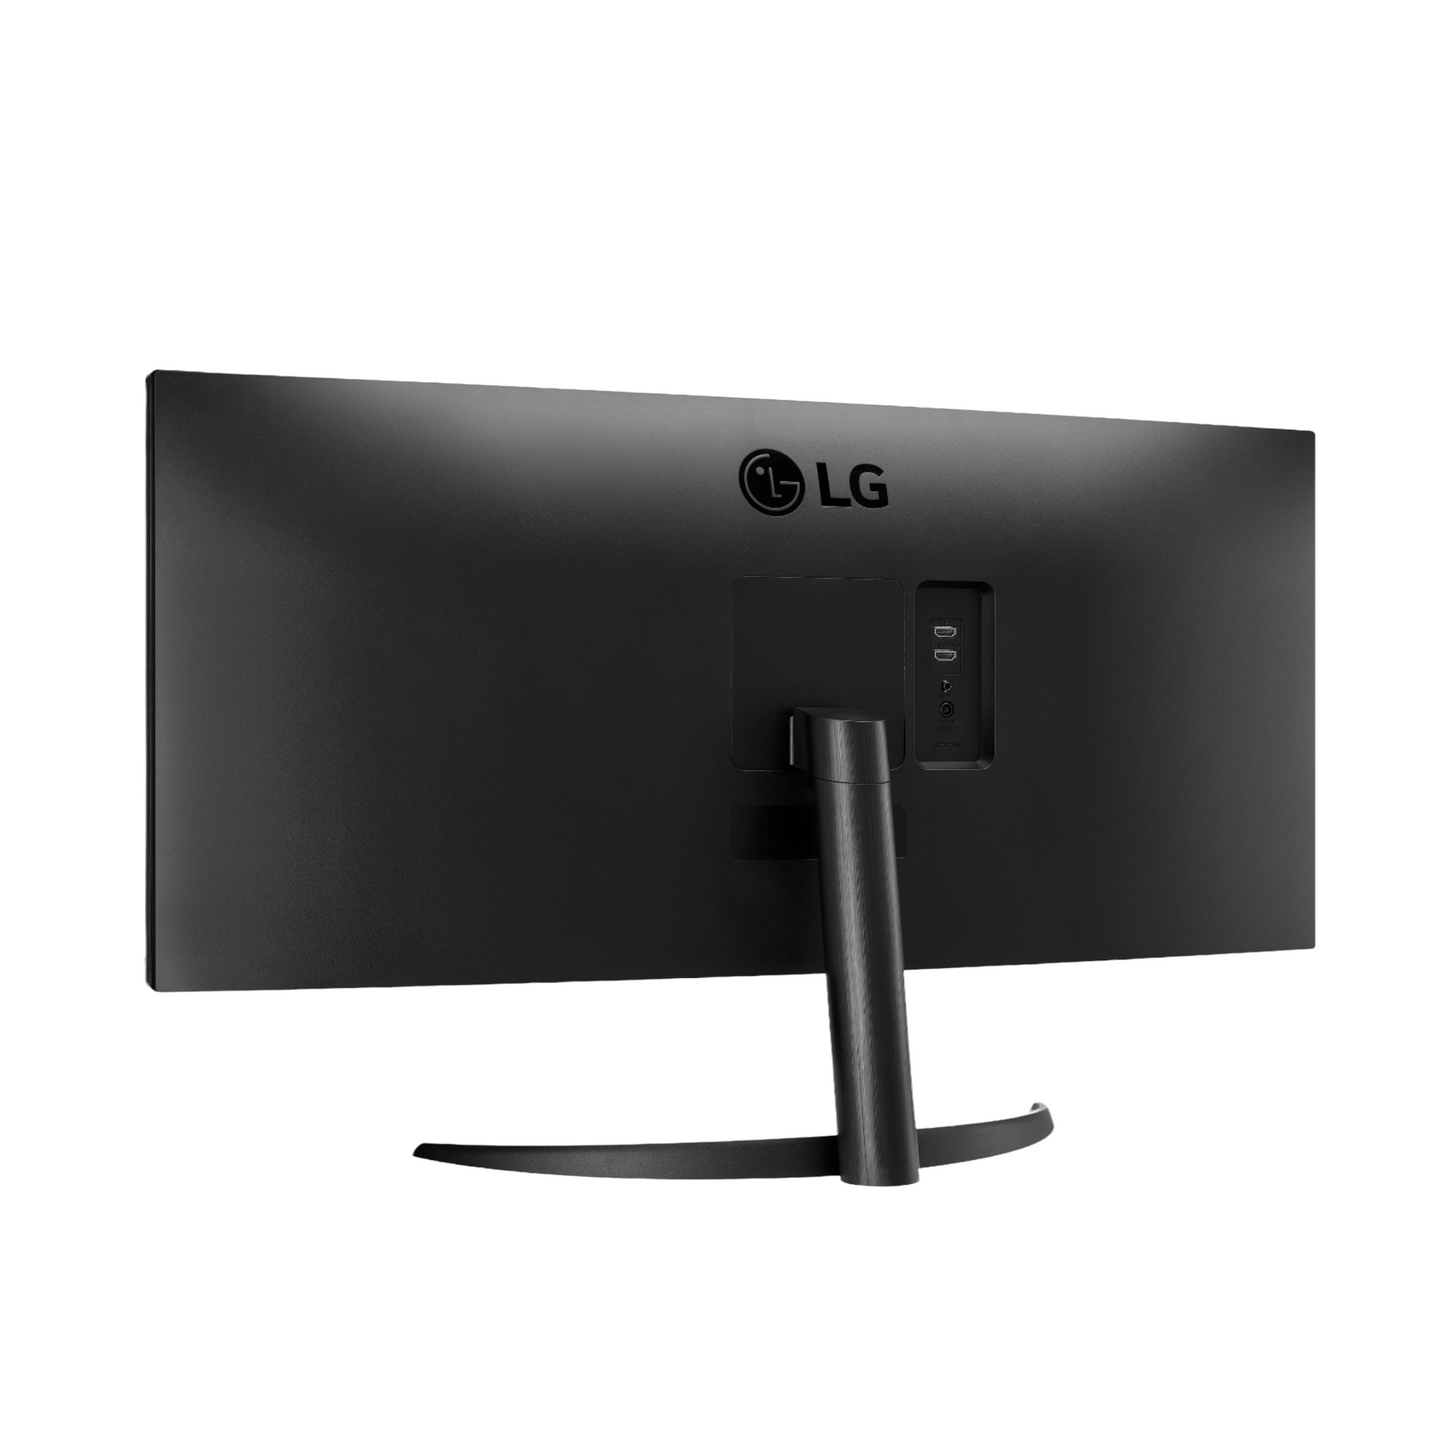 LG-34" Ultra Wide Full HD HDR Monitor with FreeSync